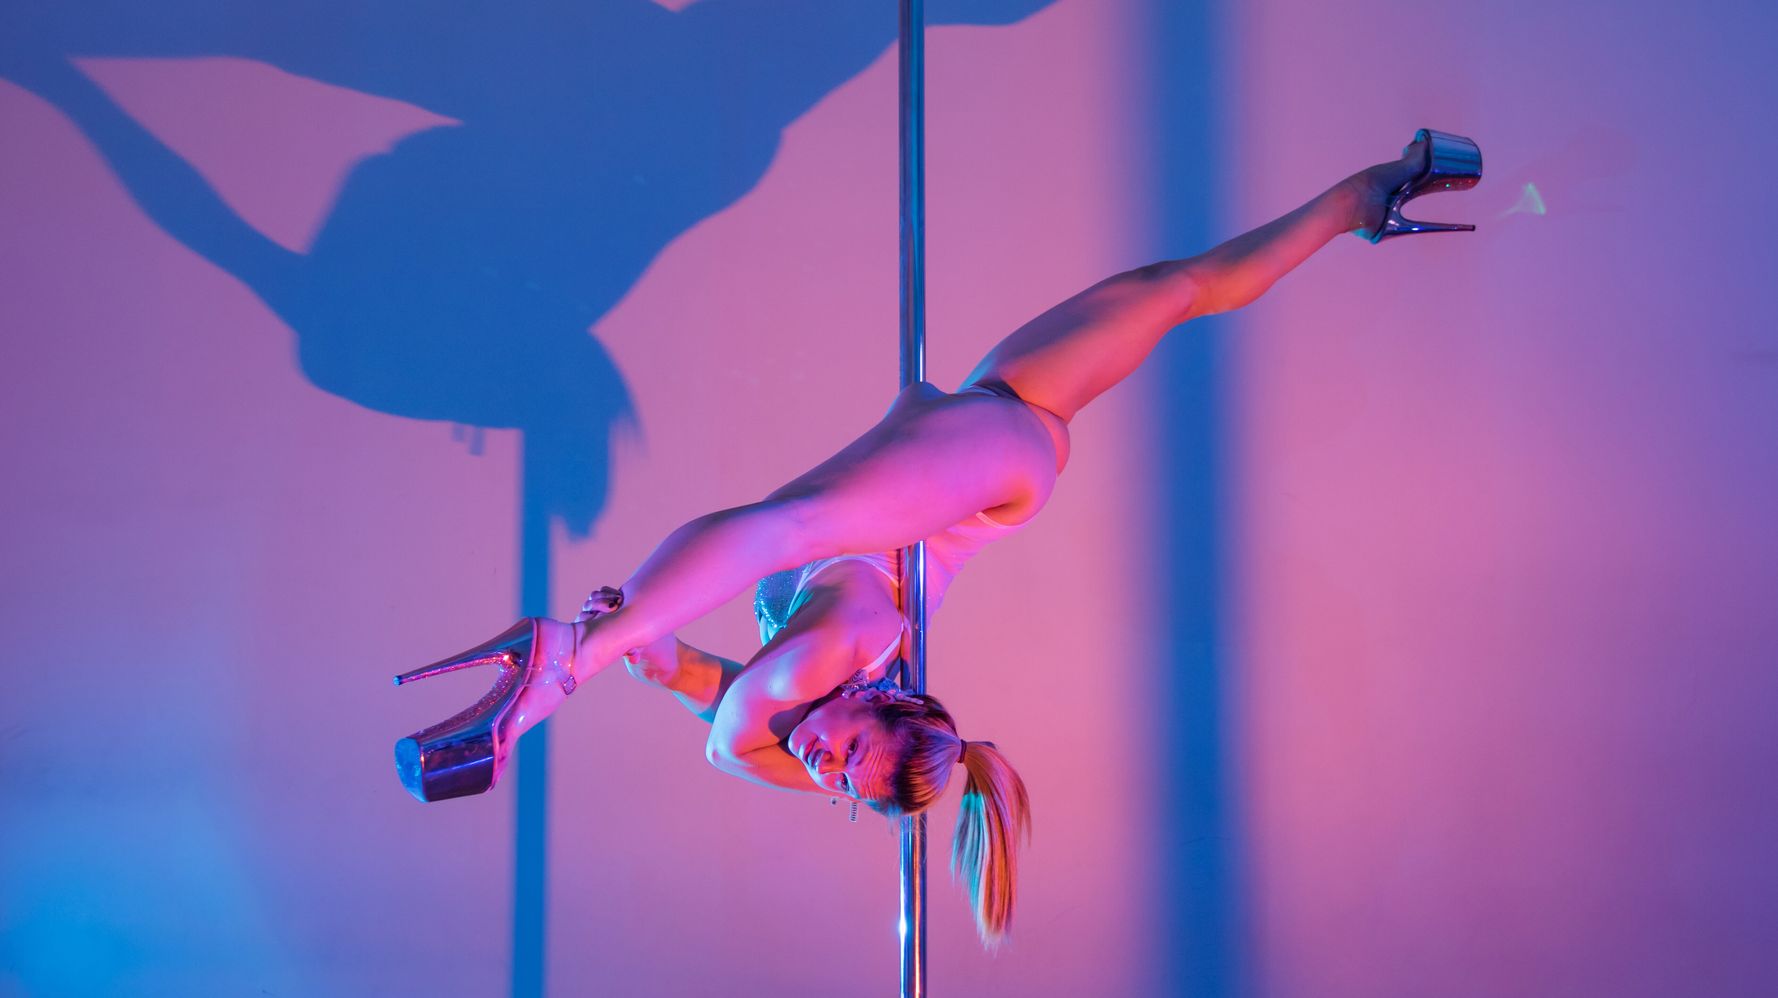 Pole Dance Sex - When I Was Outed For My Porn Past, Pole Dancing Helped Me Heal | HuffPost